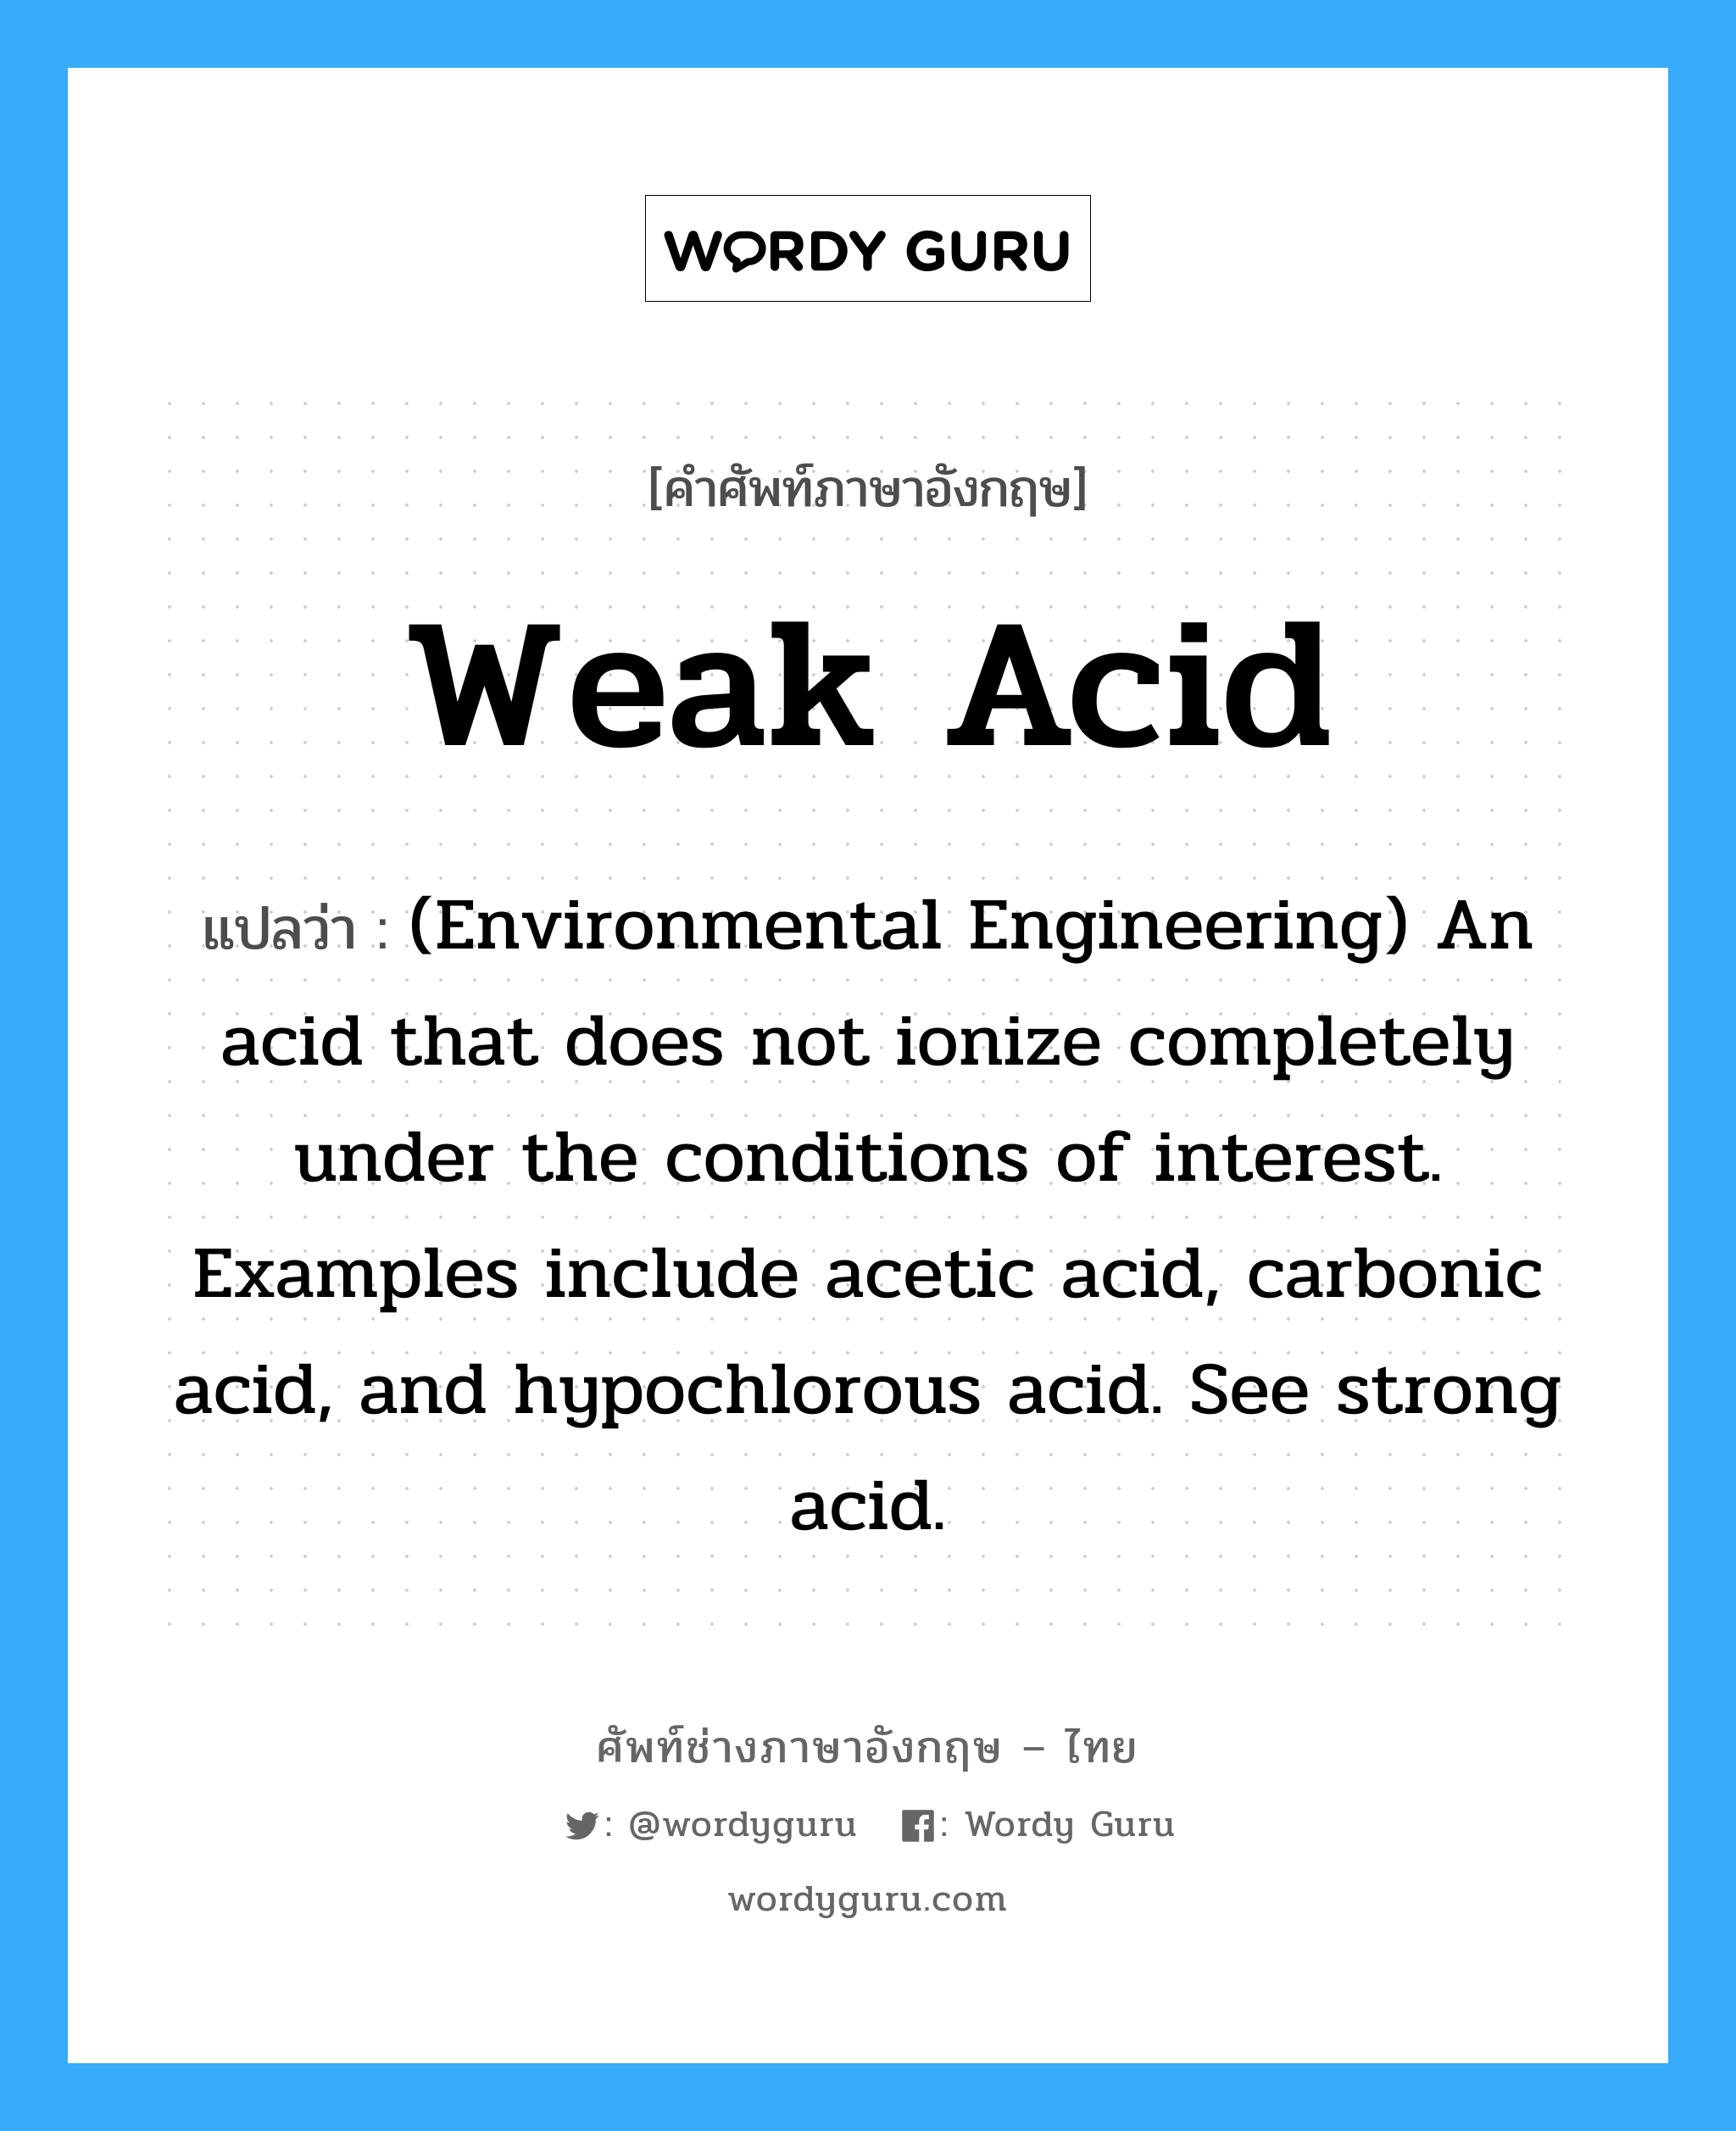 Weak acid แปลว่า?, คำศัพท์ช่างภาษาอังกฤษ - ไทย Weak acid คำศัพท์ภาษาอังกฤษ Weak acid แปลว่า (Environmental Engineering) An acid that does not ionize completely under the conditions of interest. Examples include acetic acid, carbonic acid, and hypochlorous acid. See strong acid.